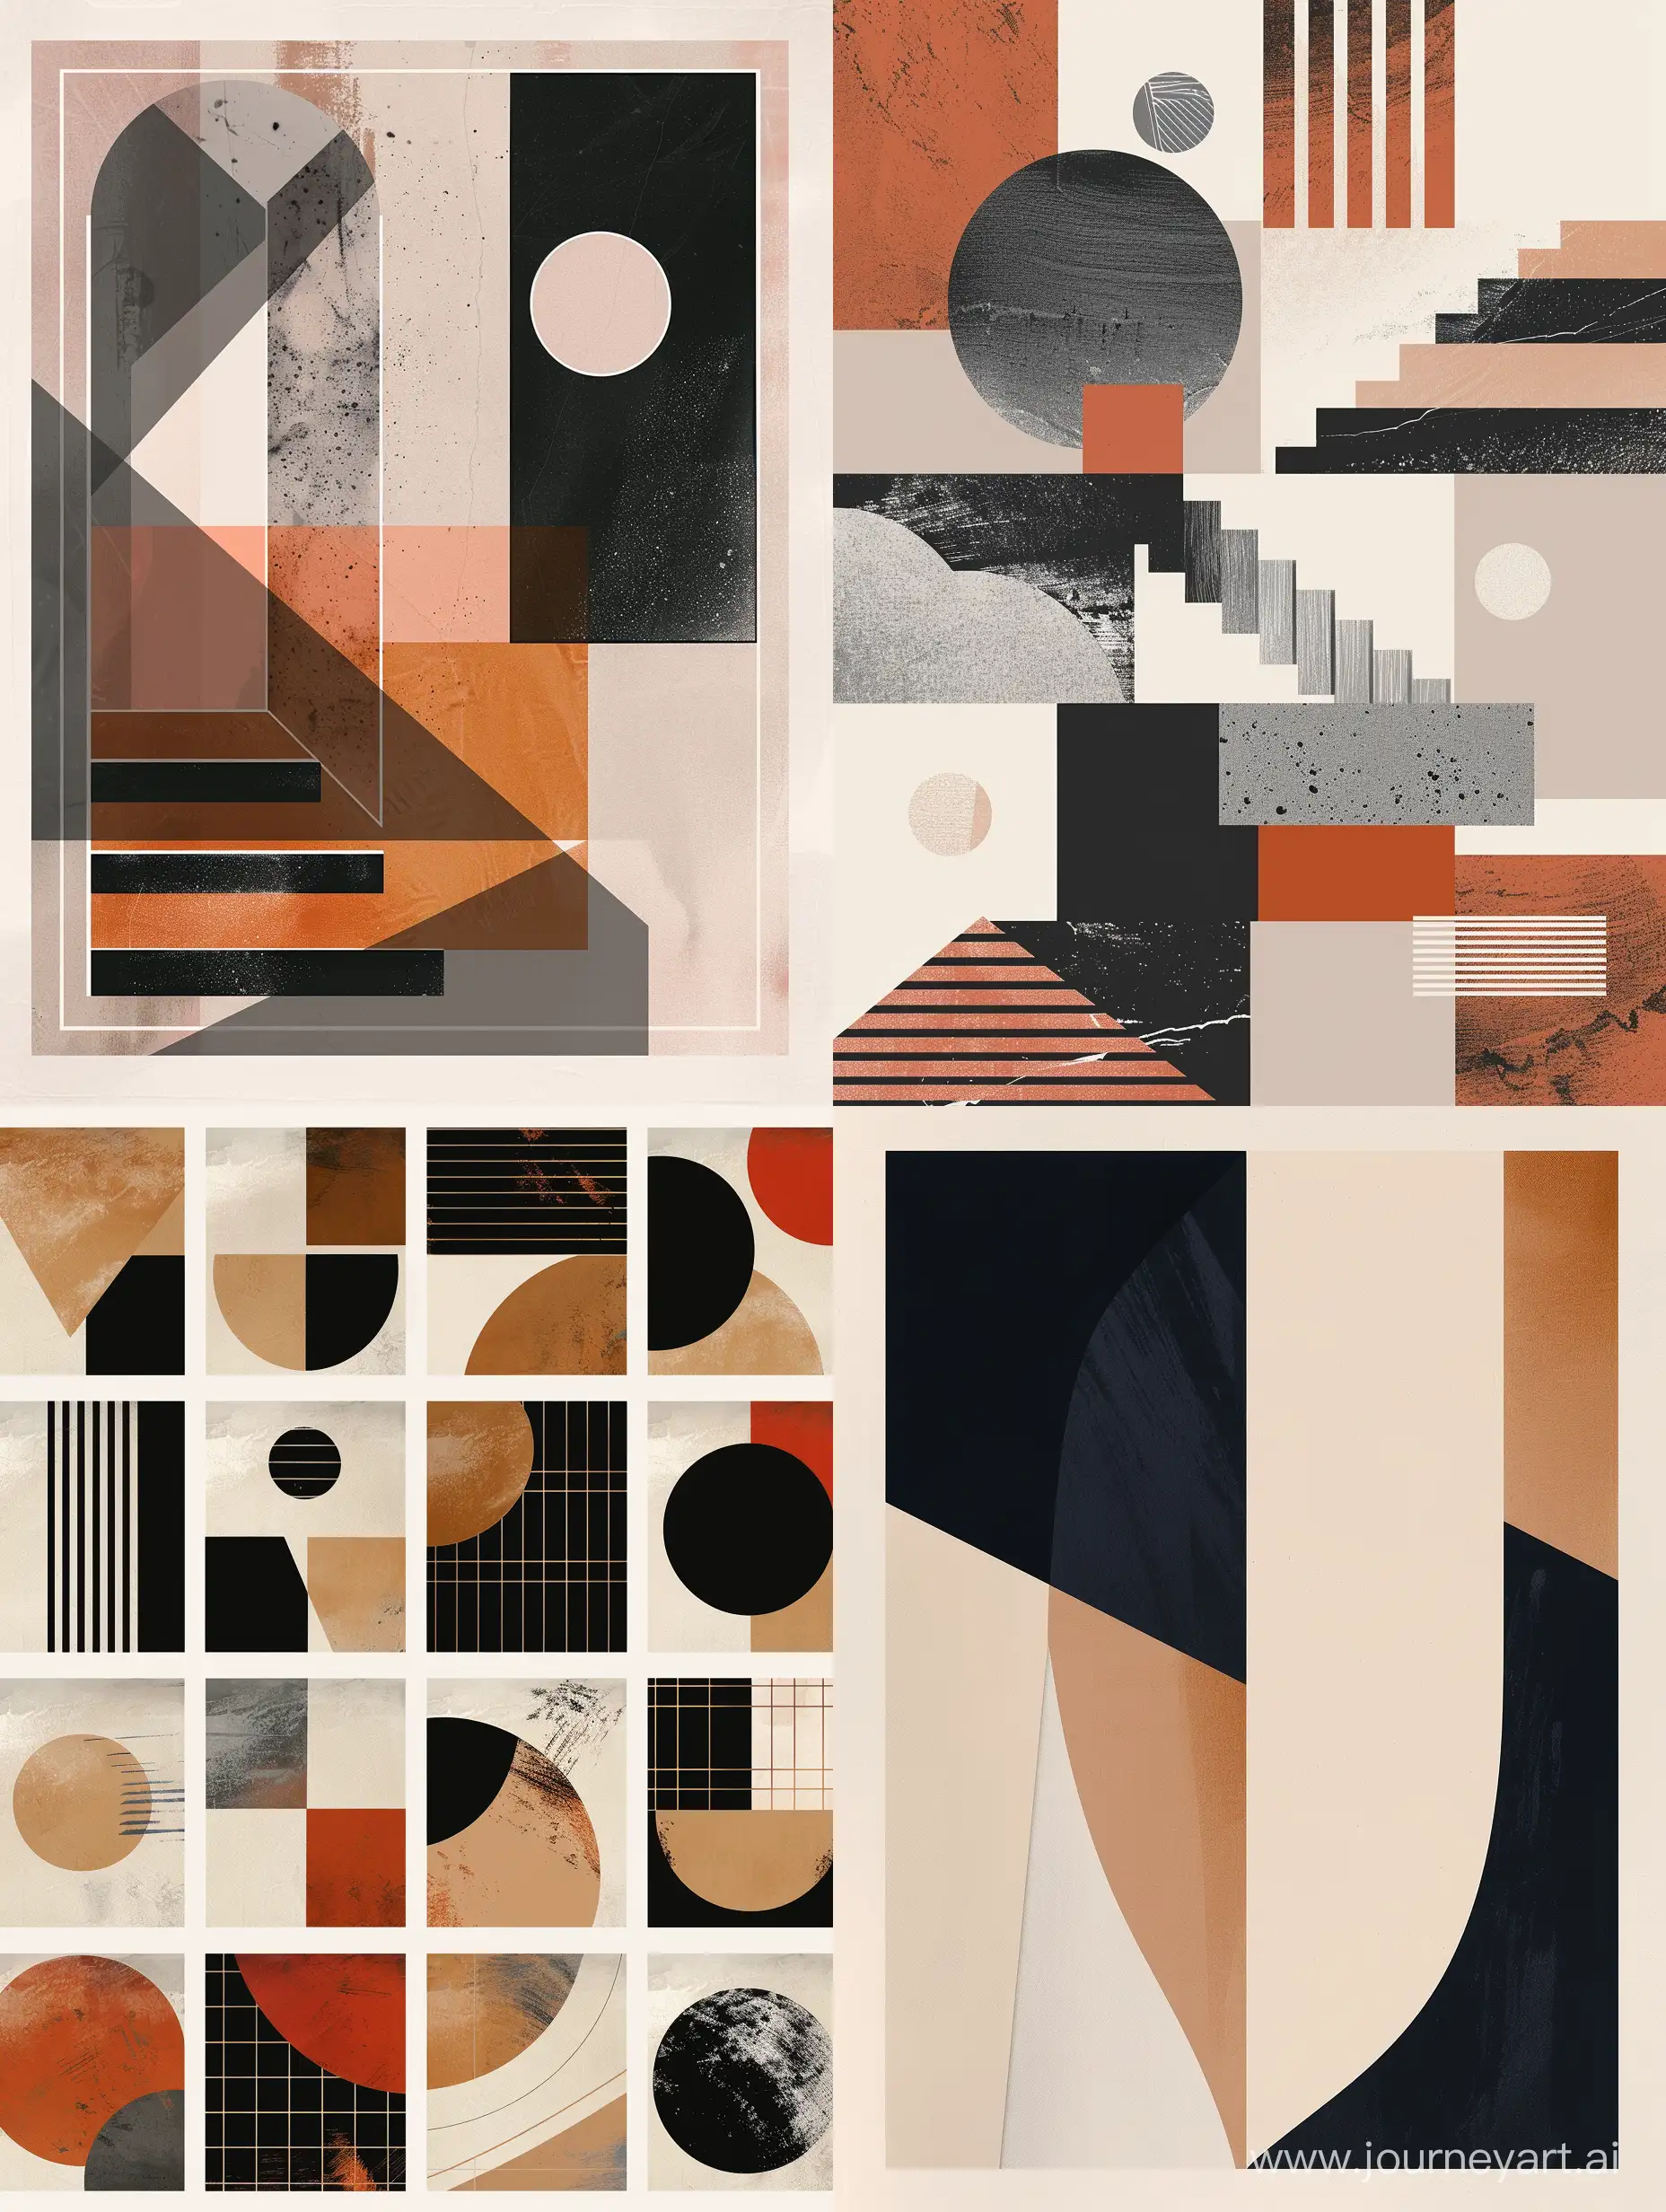 Design a set of minimalist abstract prints using monochromatic color schemes and simple geometric patterns, exploring the interplay of light and shadow to create dynamic visual effects.